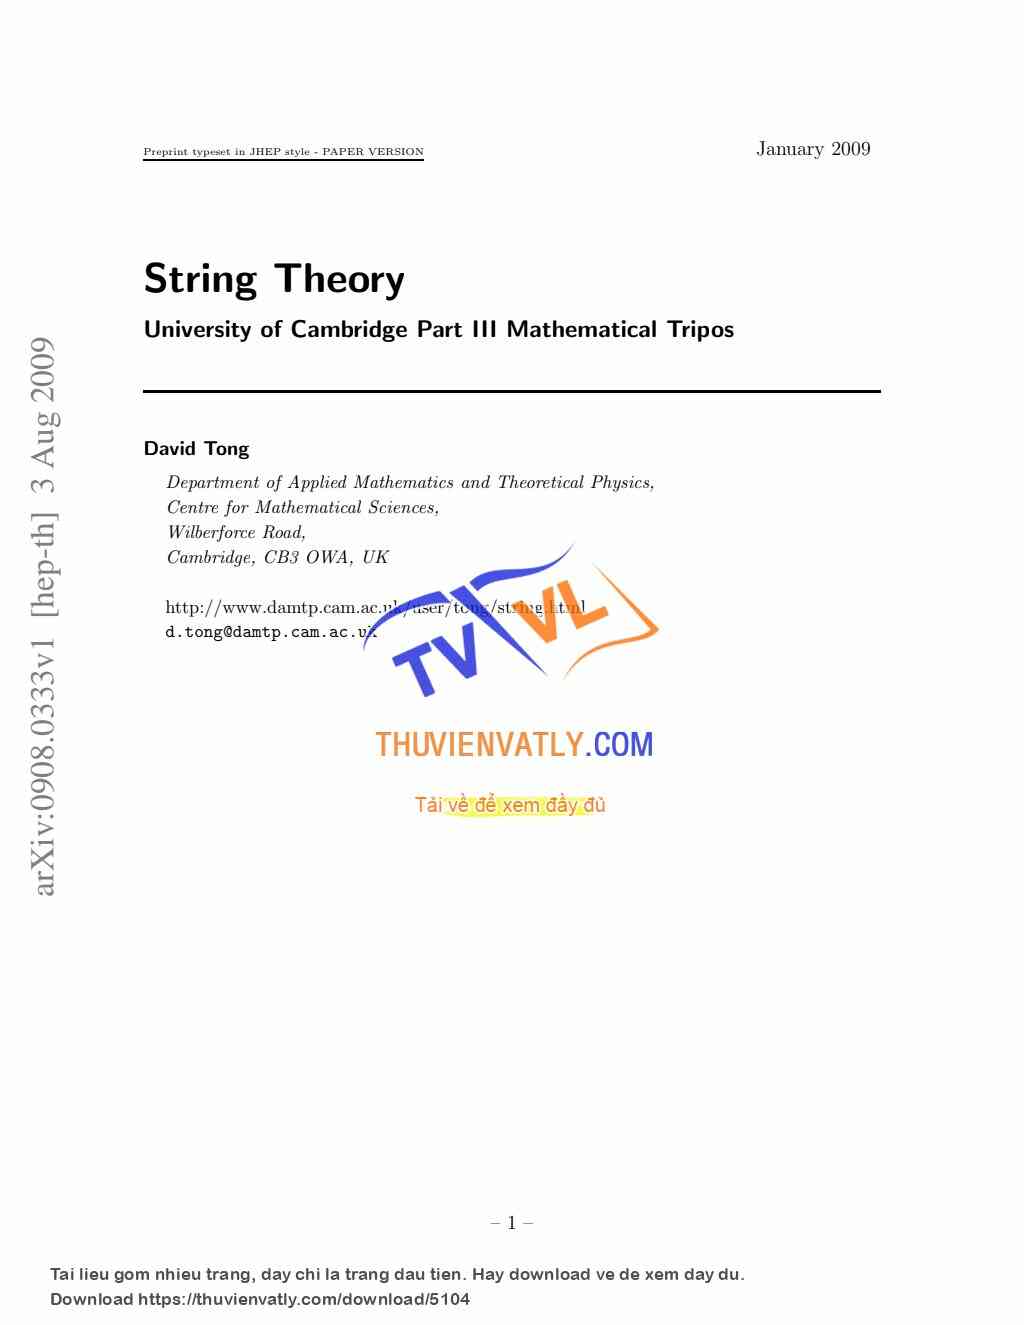 Lectures on String Theory